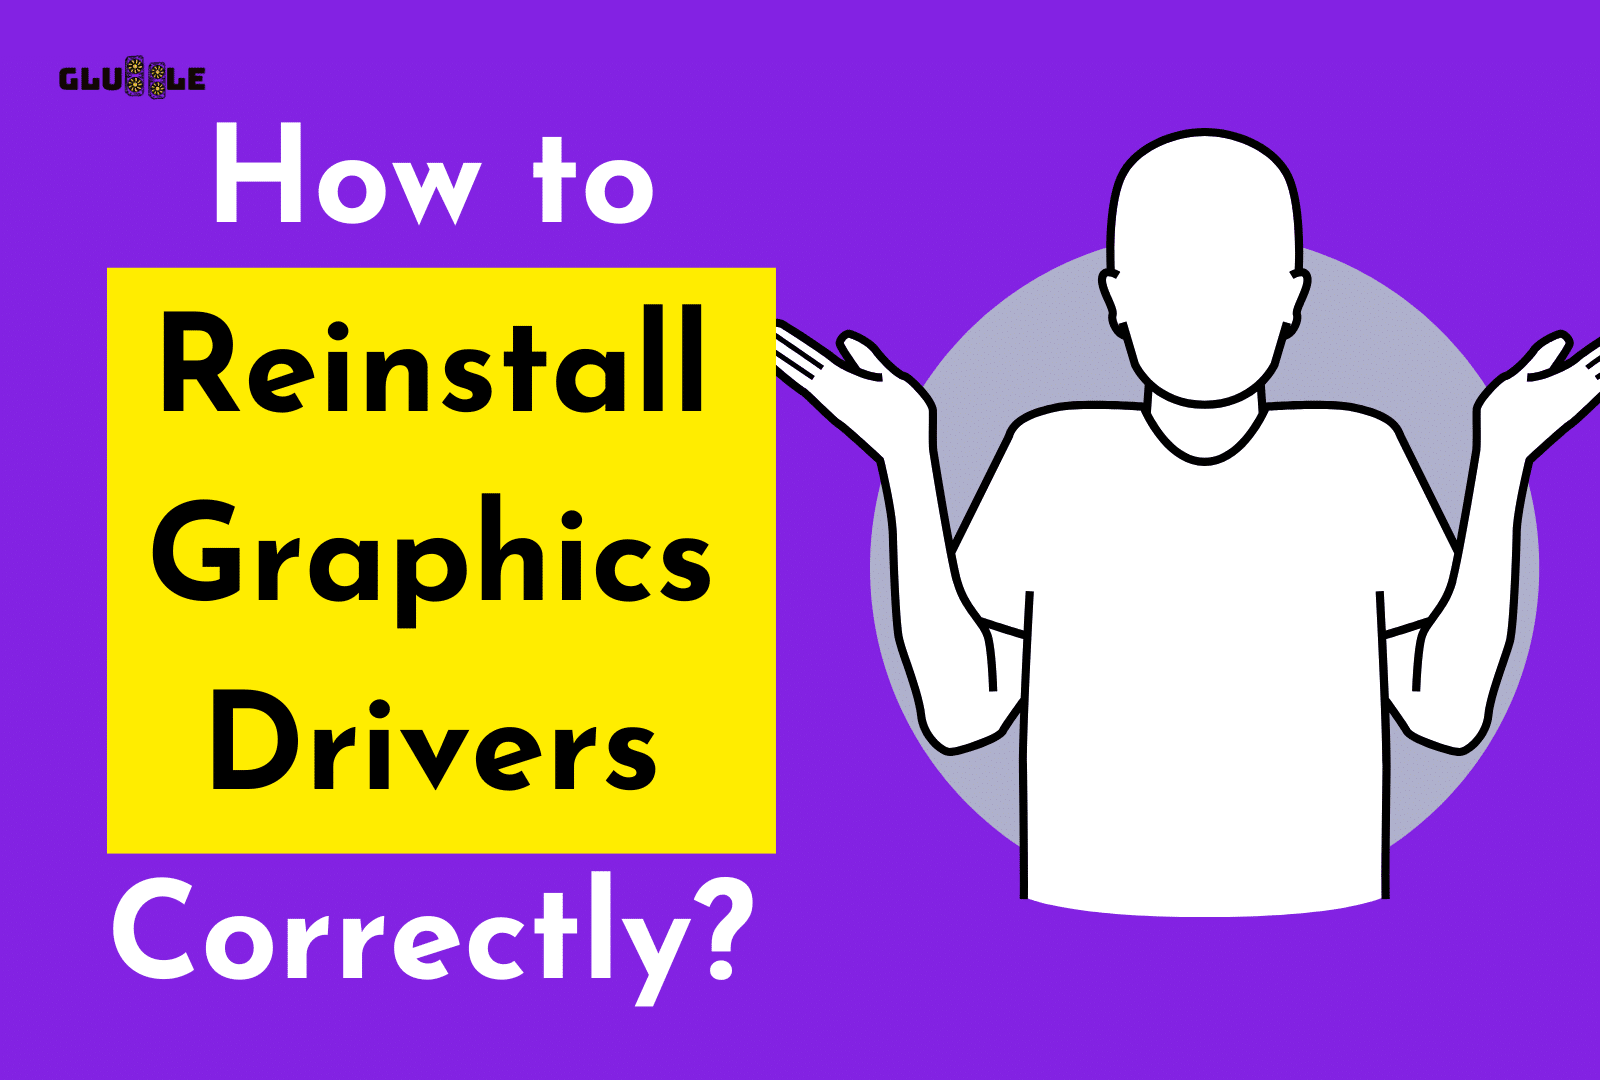 C:\Users\Mohsin\Downloads\How to Reinstall Graphics Drivers Correctly.png